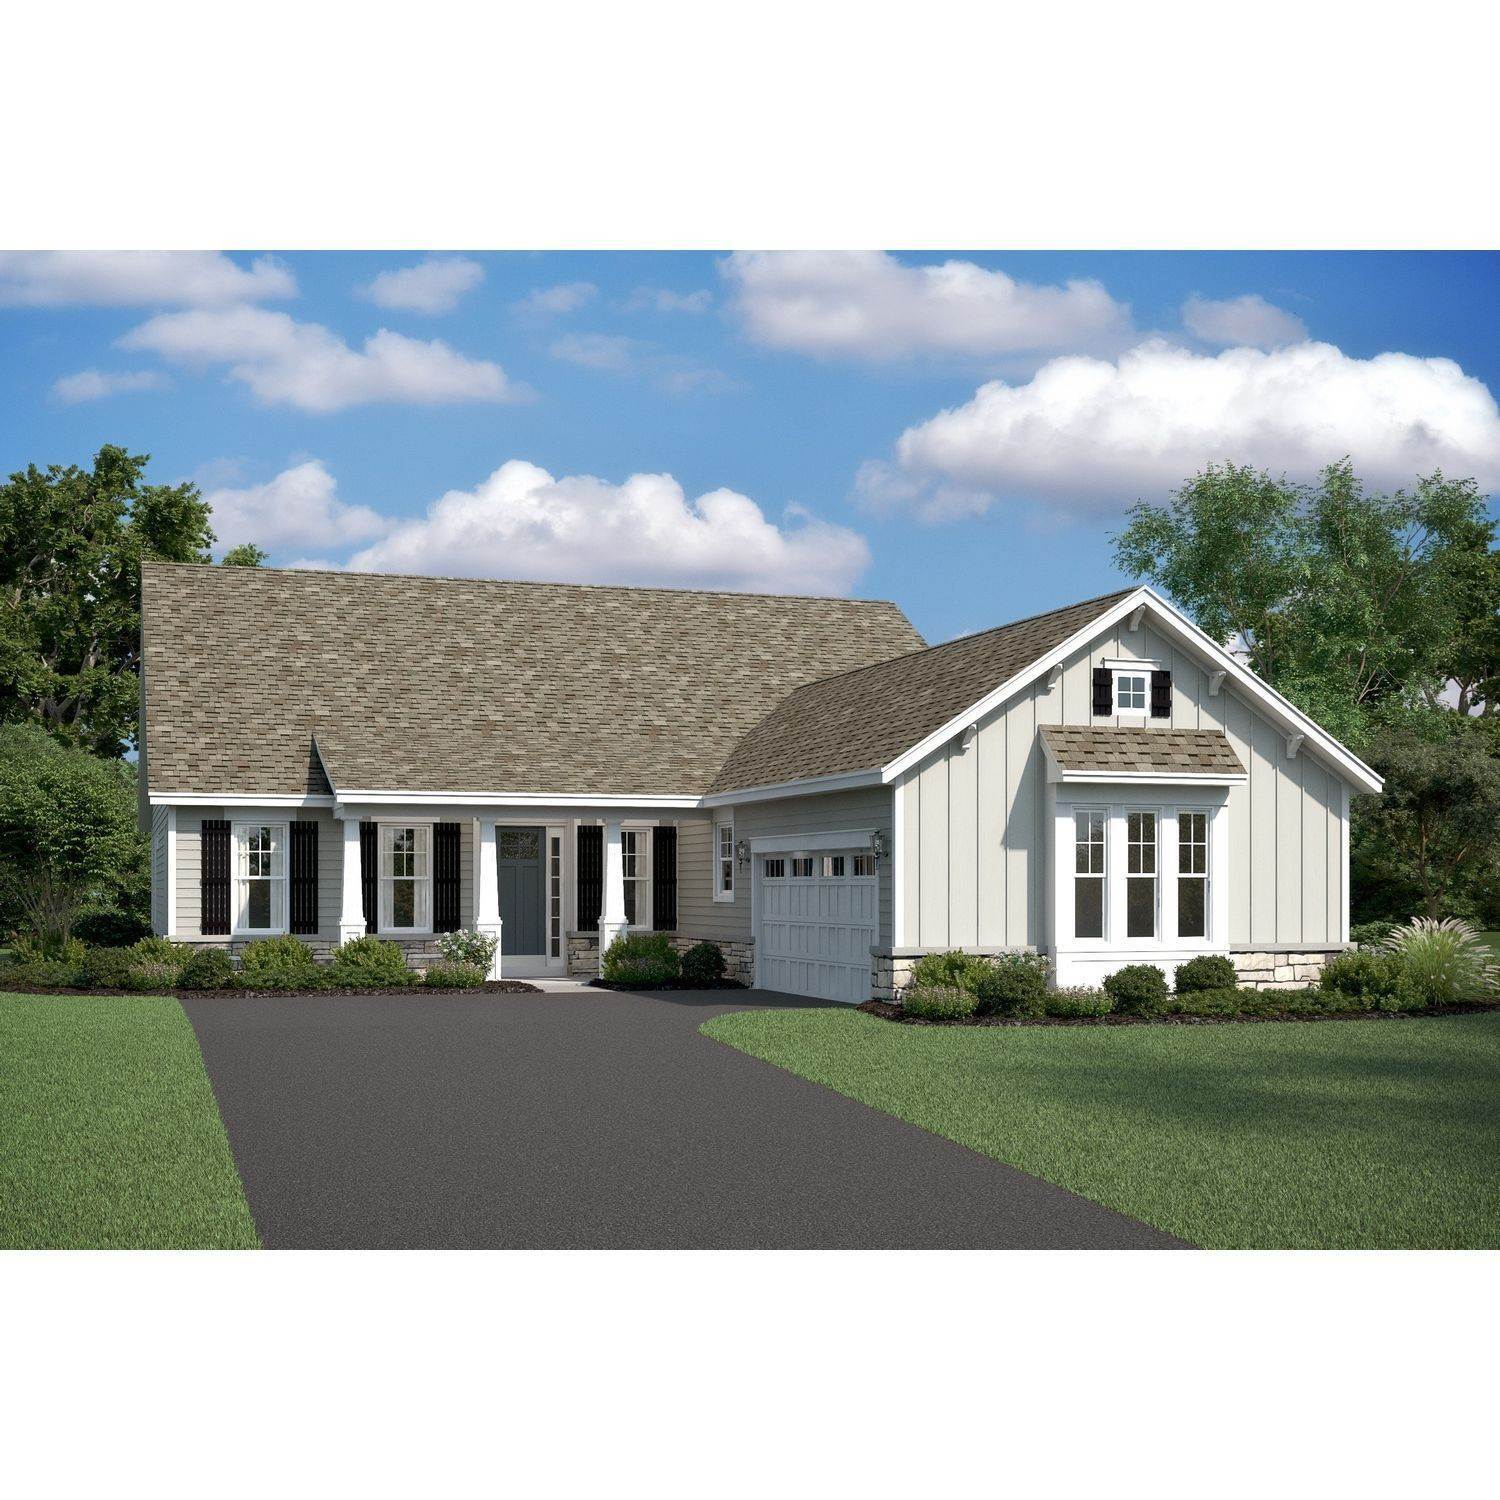 27. Single Family for Sale at K. Hovnanian's® Four Seasons At Kent Island - Sing 203 Bayberry Drive, Chester, MD 21619